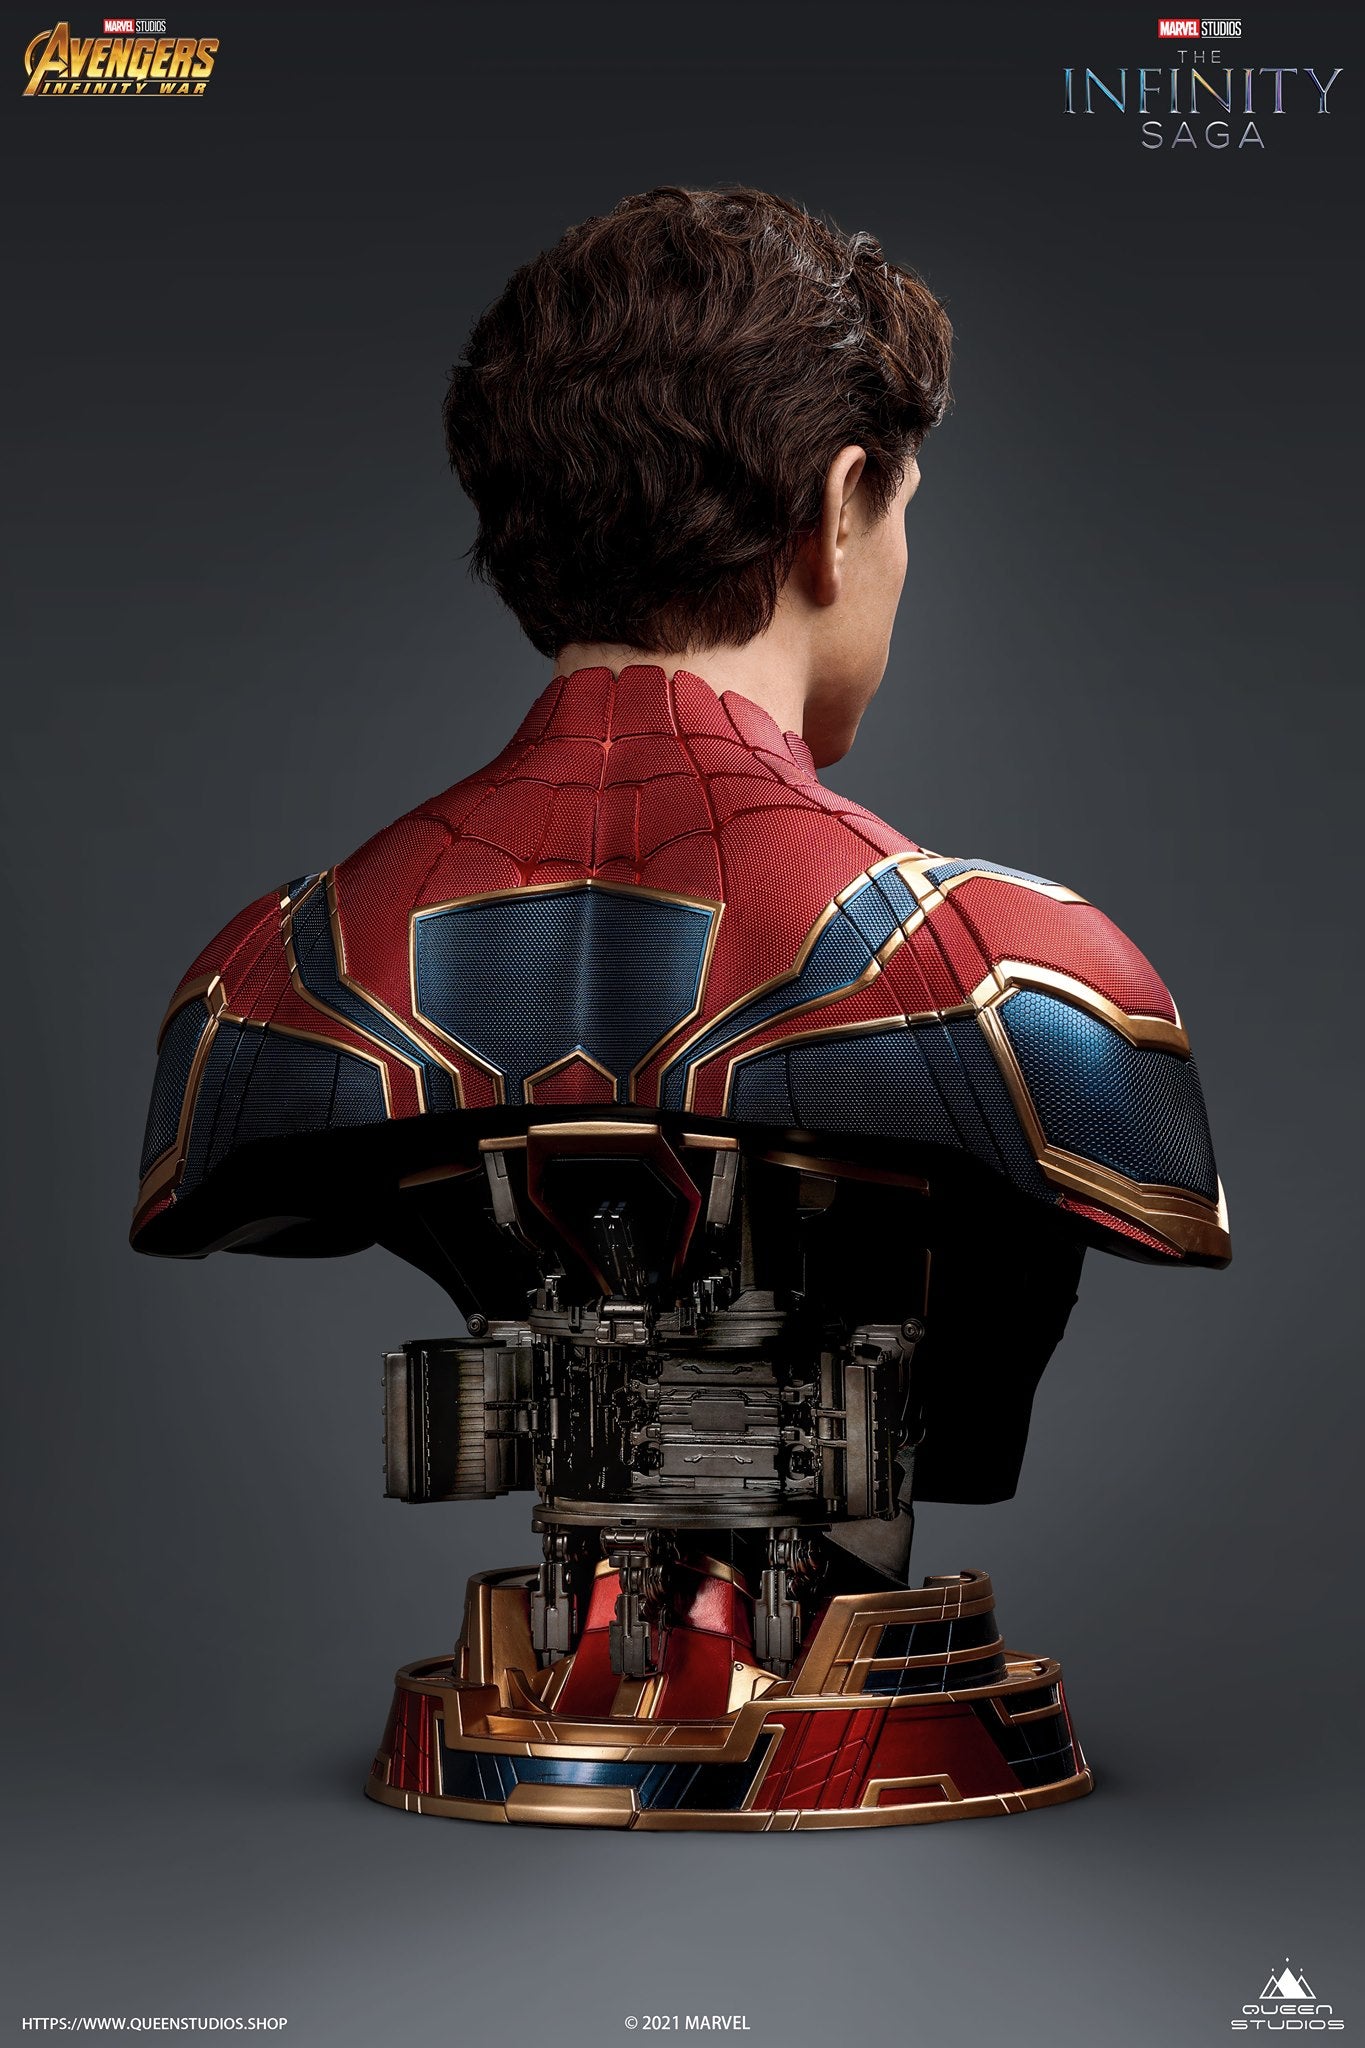 Spider-Man Life-Size Bust by Marvel